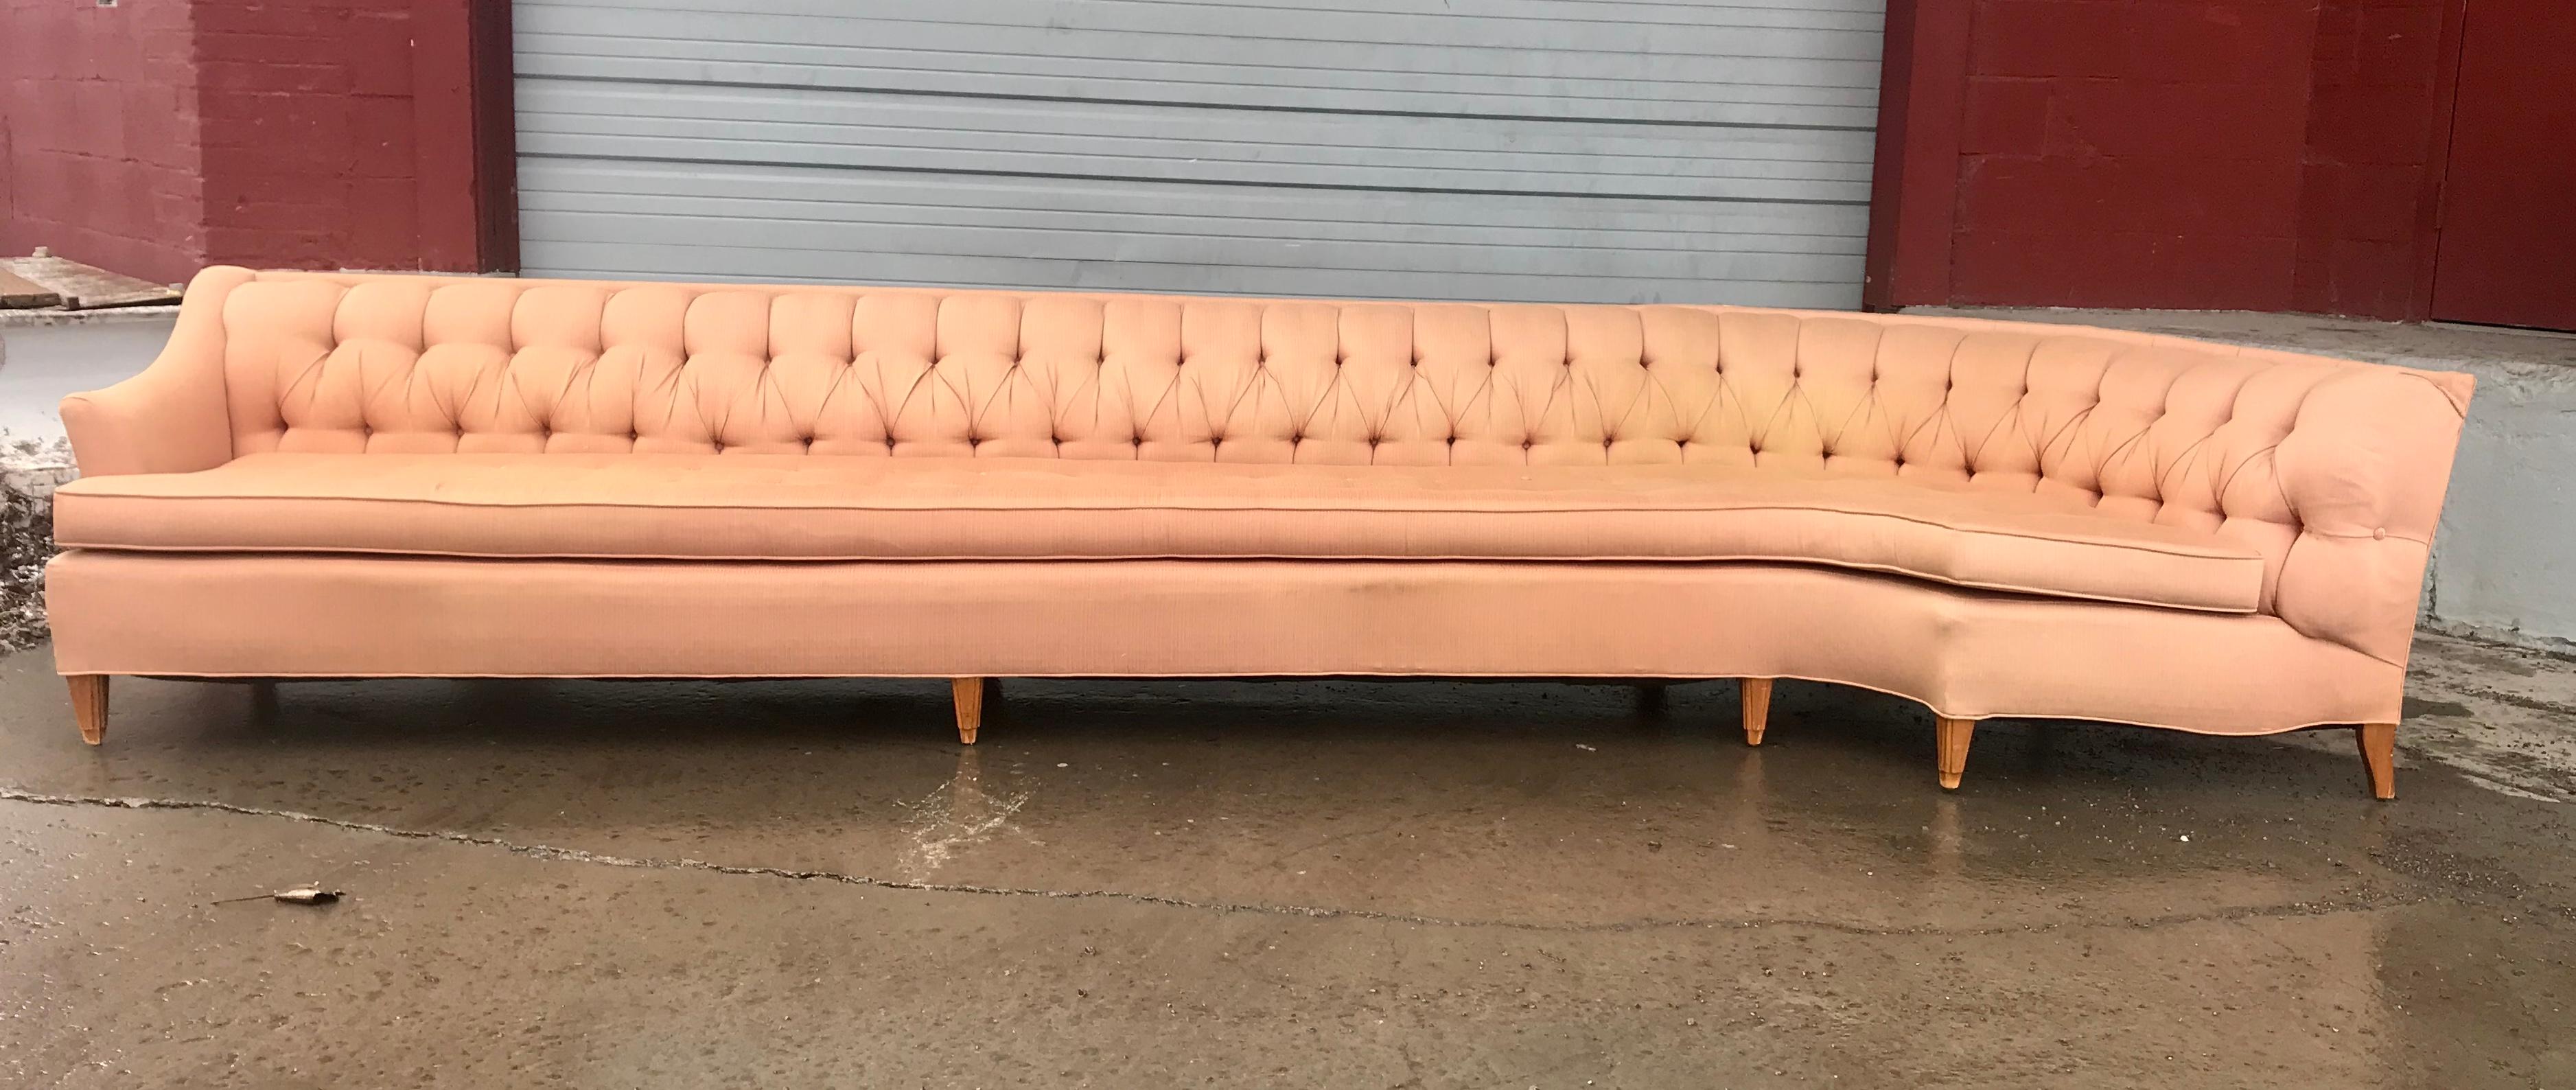 Stunning tufted 12 foot sofa, showstopper!, Custom built in the 1960s, amazing quality and construction, retains original fabric, some fading and missing buttons to bottom cushion, free of rips, tears, odor stains etc. Unusual leg design, original